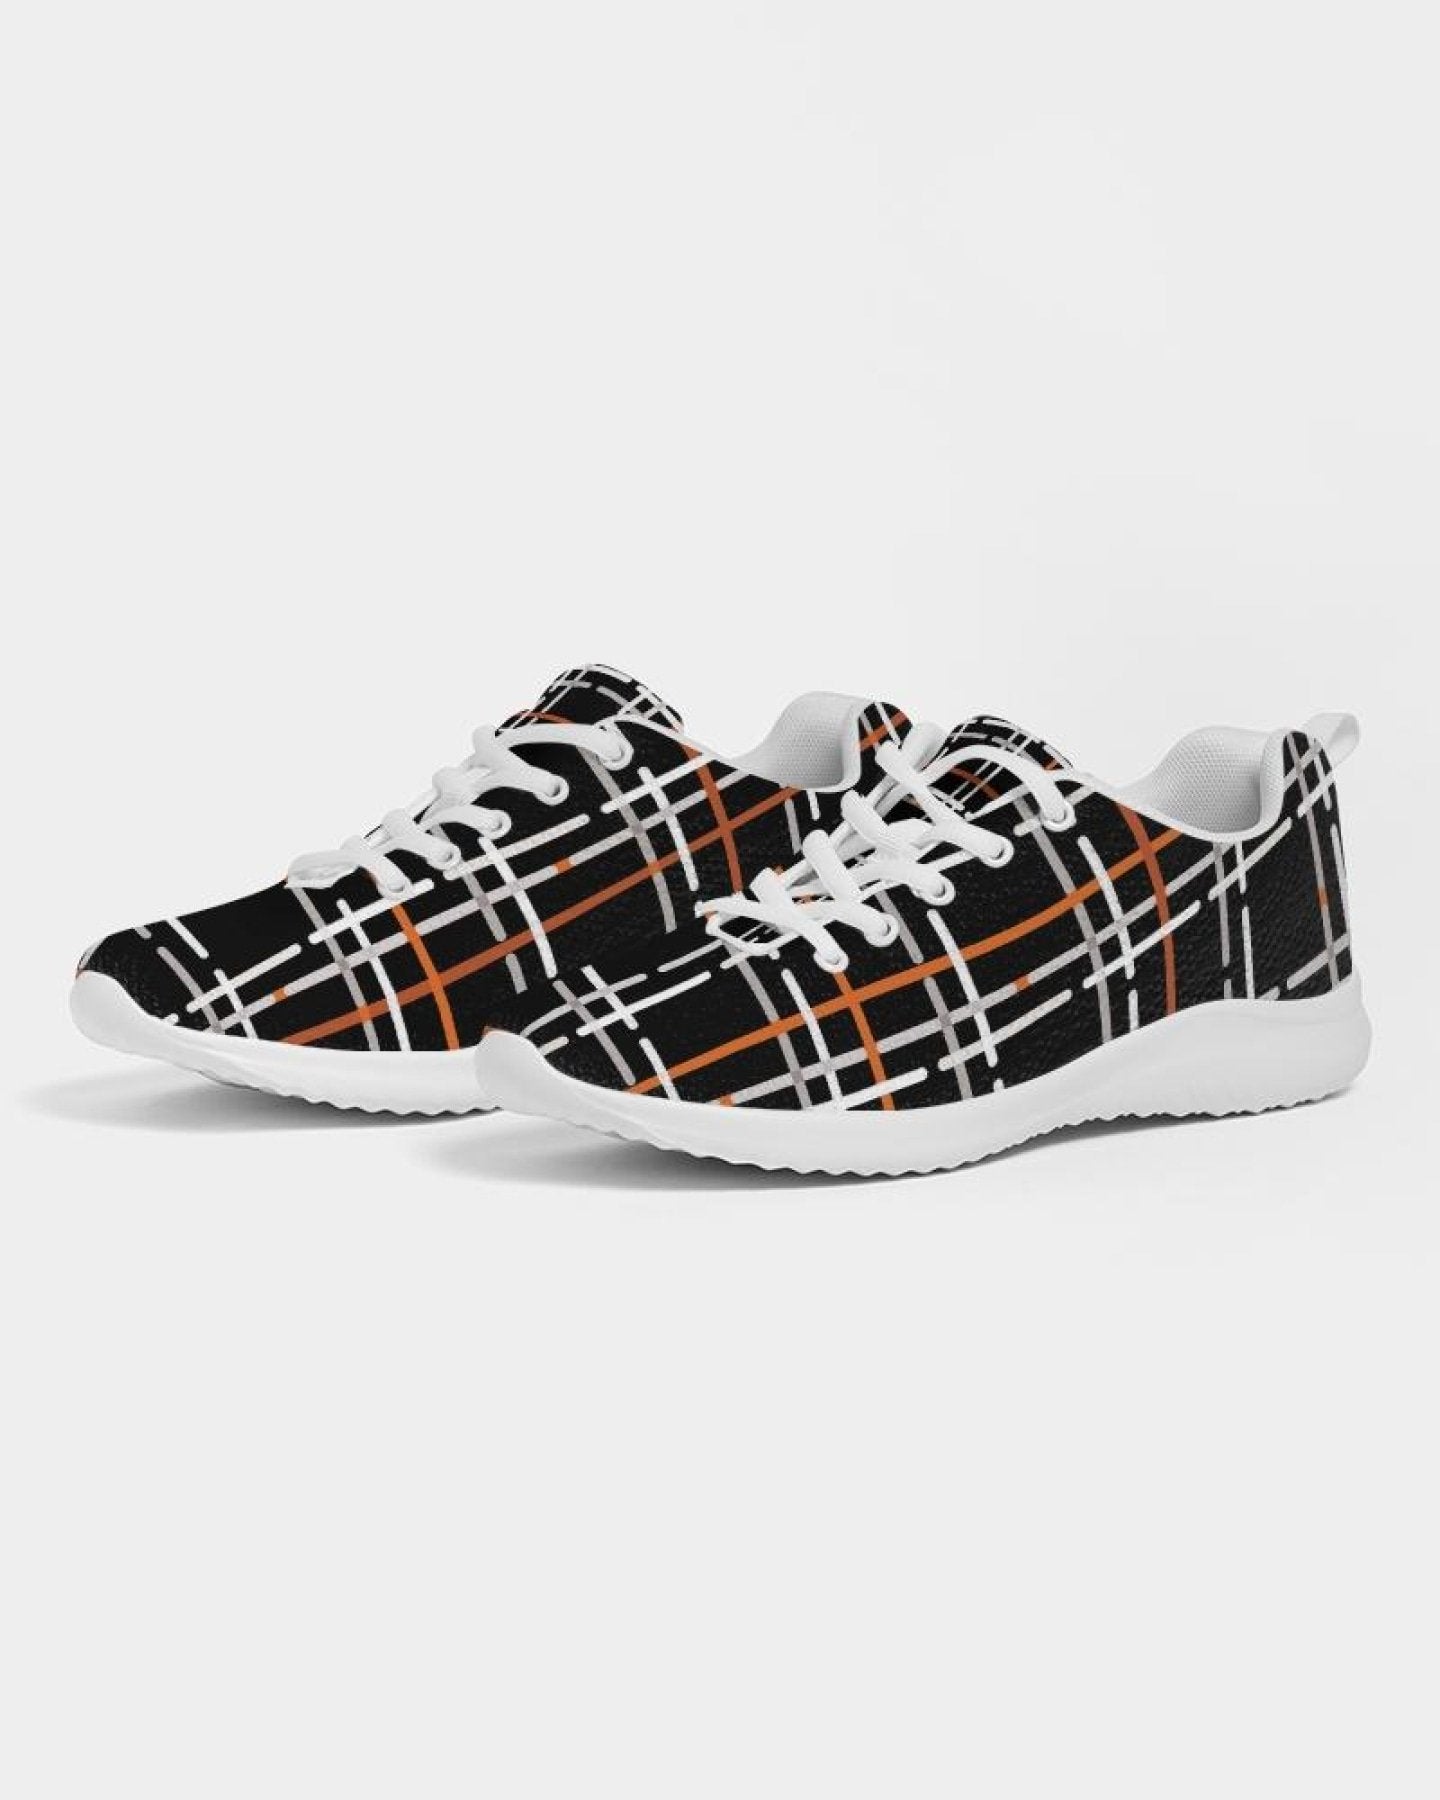 Uniquely You Womens Sneakers - Canvas Running Shoes, Black Plaid Print